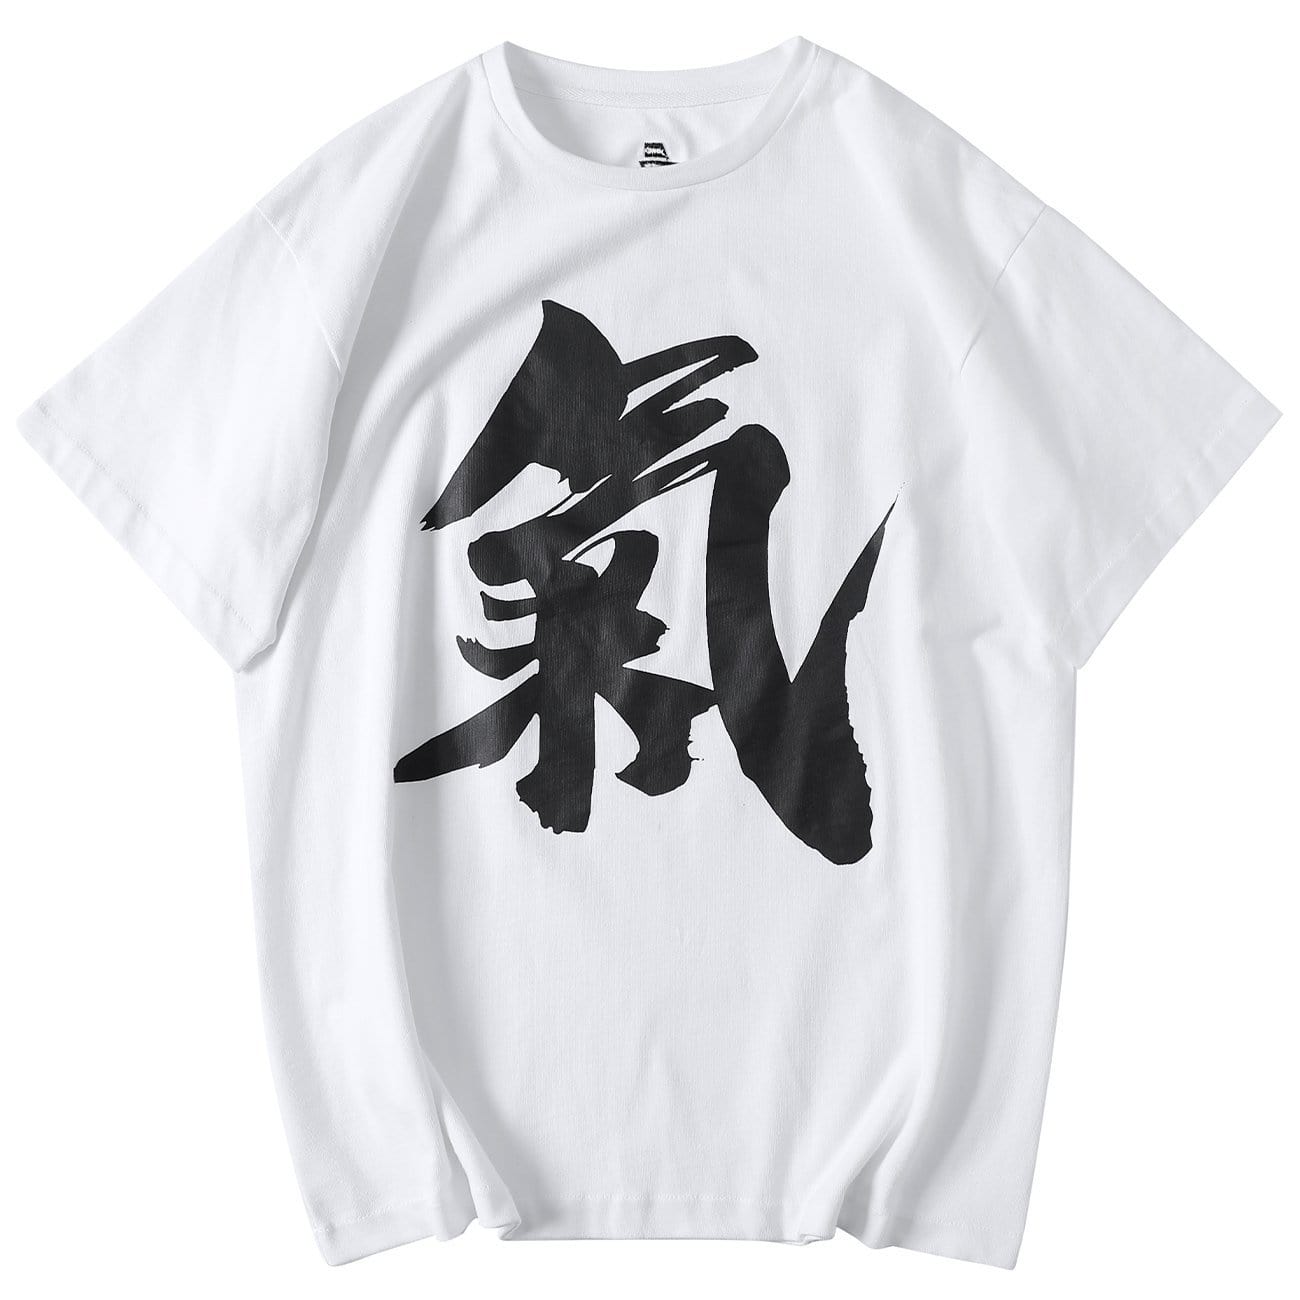 TO Functional Chinese Printed Tee